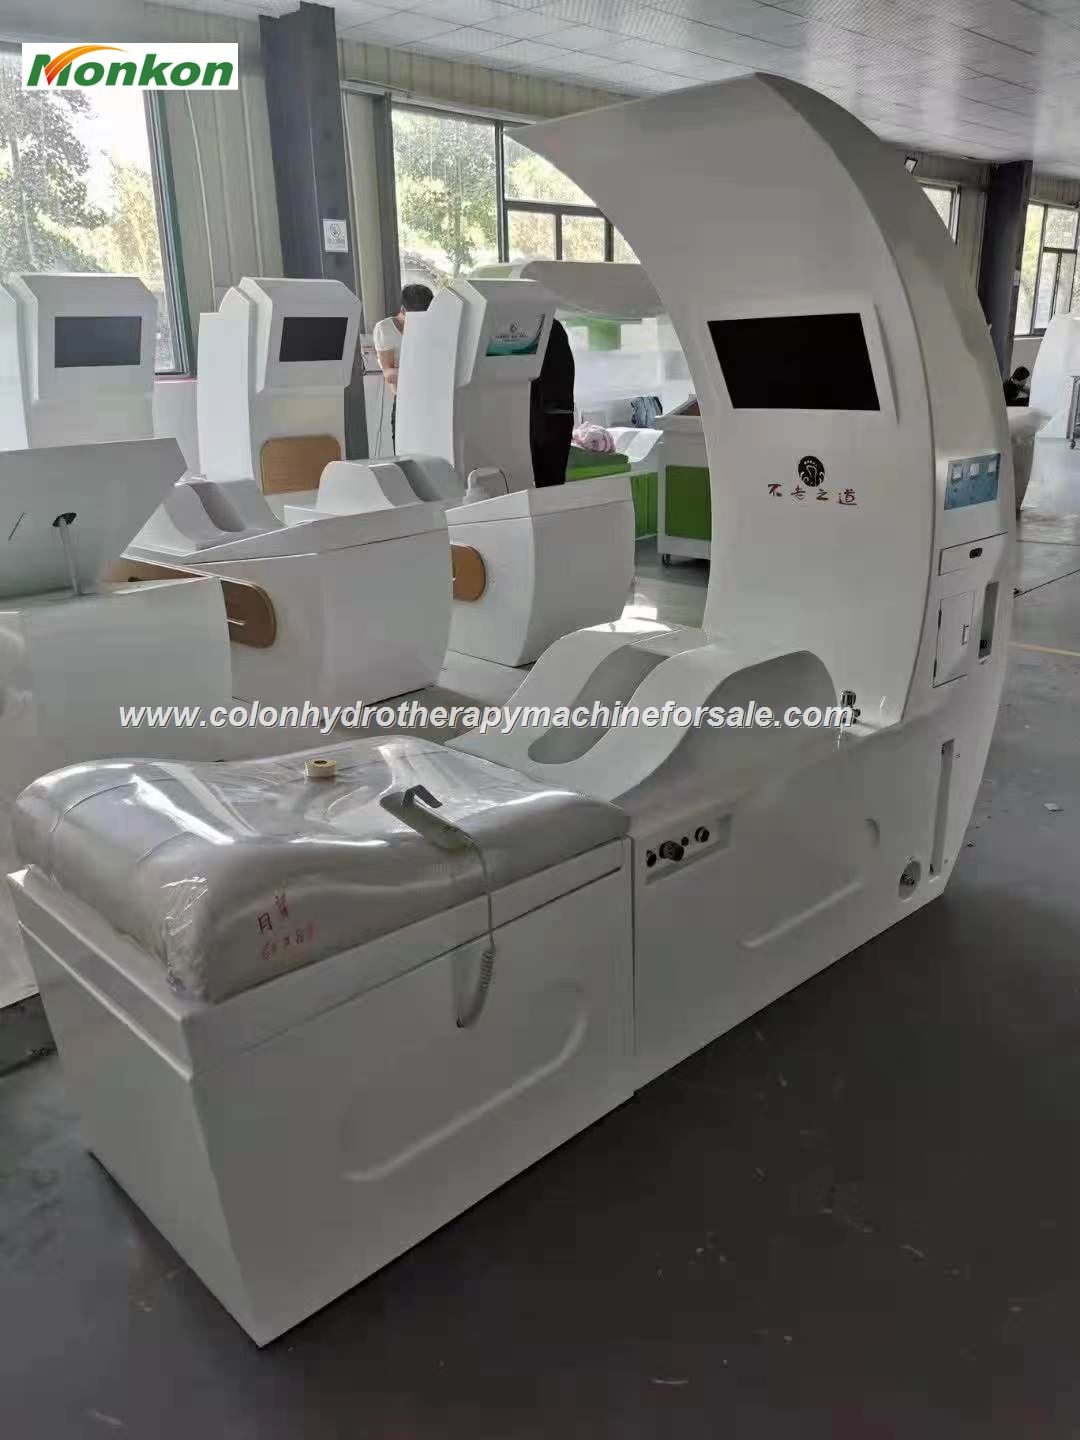 Used colon hydrotherapy equipment for sale